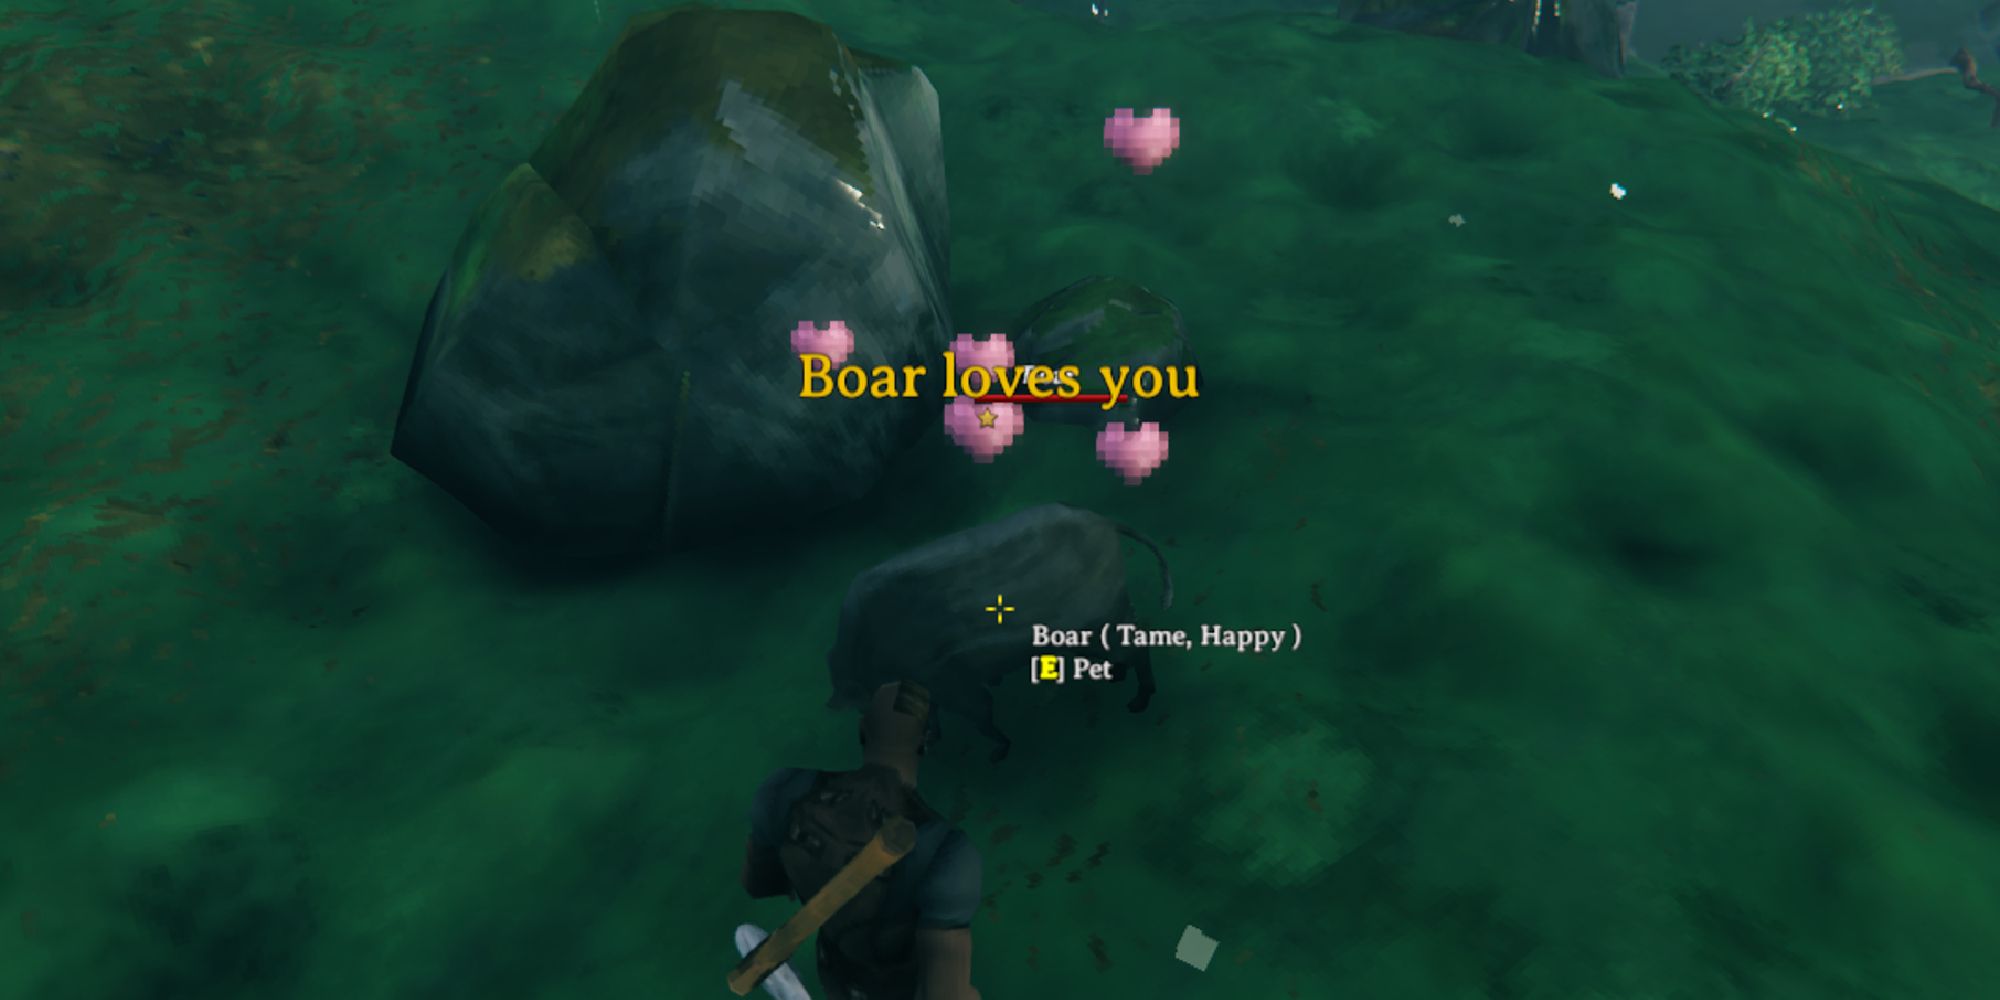 valheim boar loves you message message shown while hoving over boar